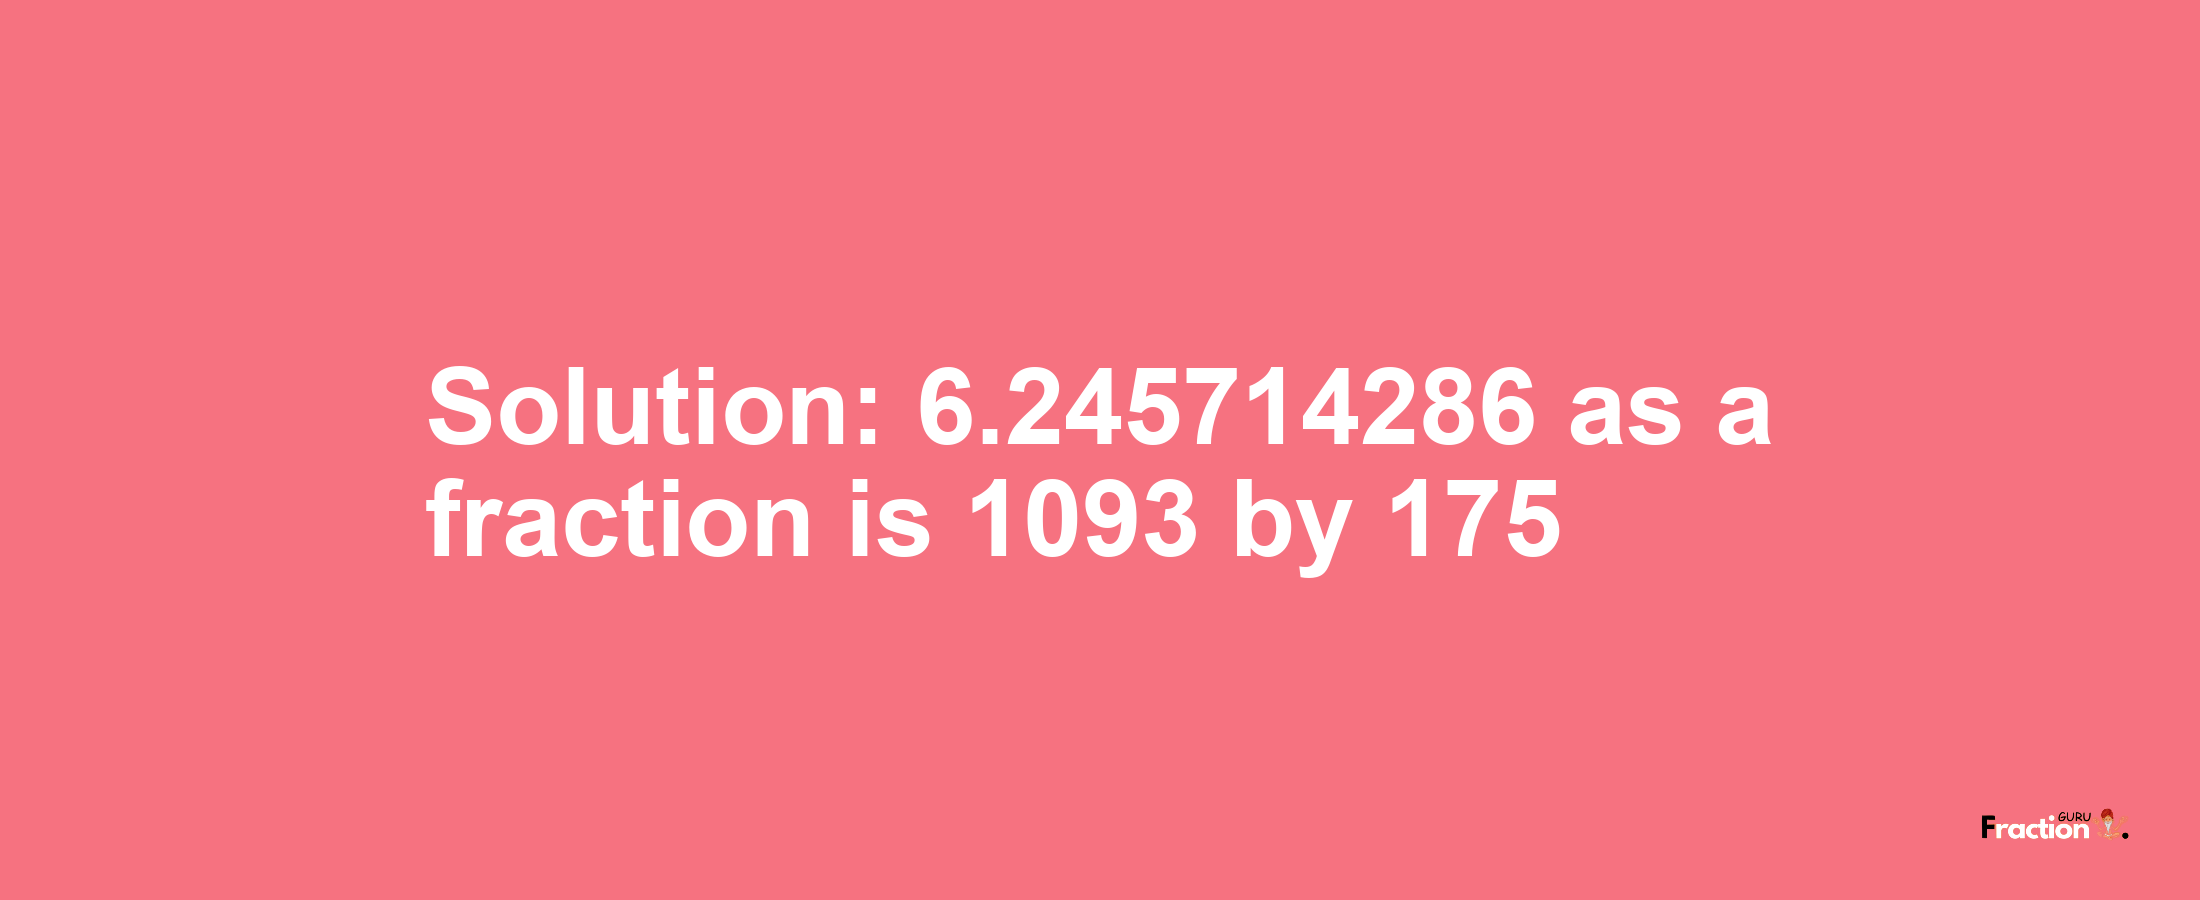 Solution:6.245714286 as a fraction is 1093/175